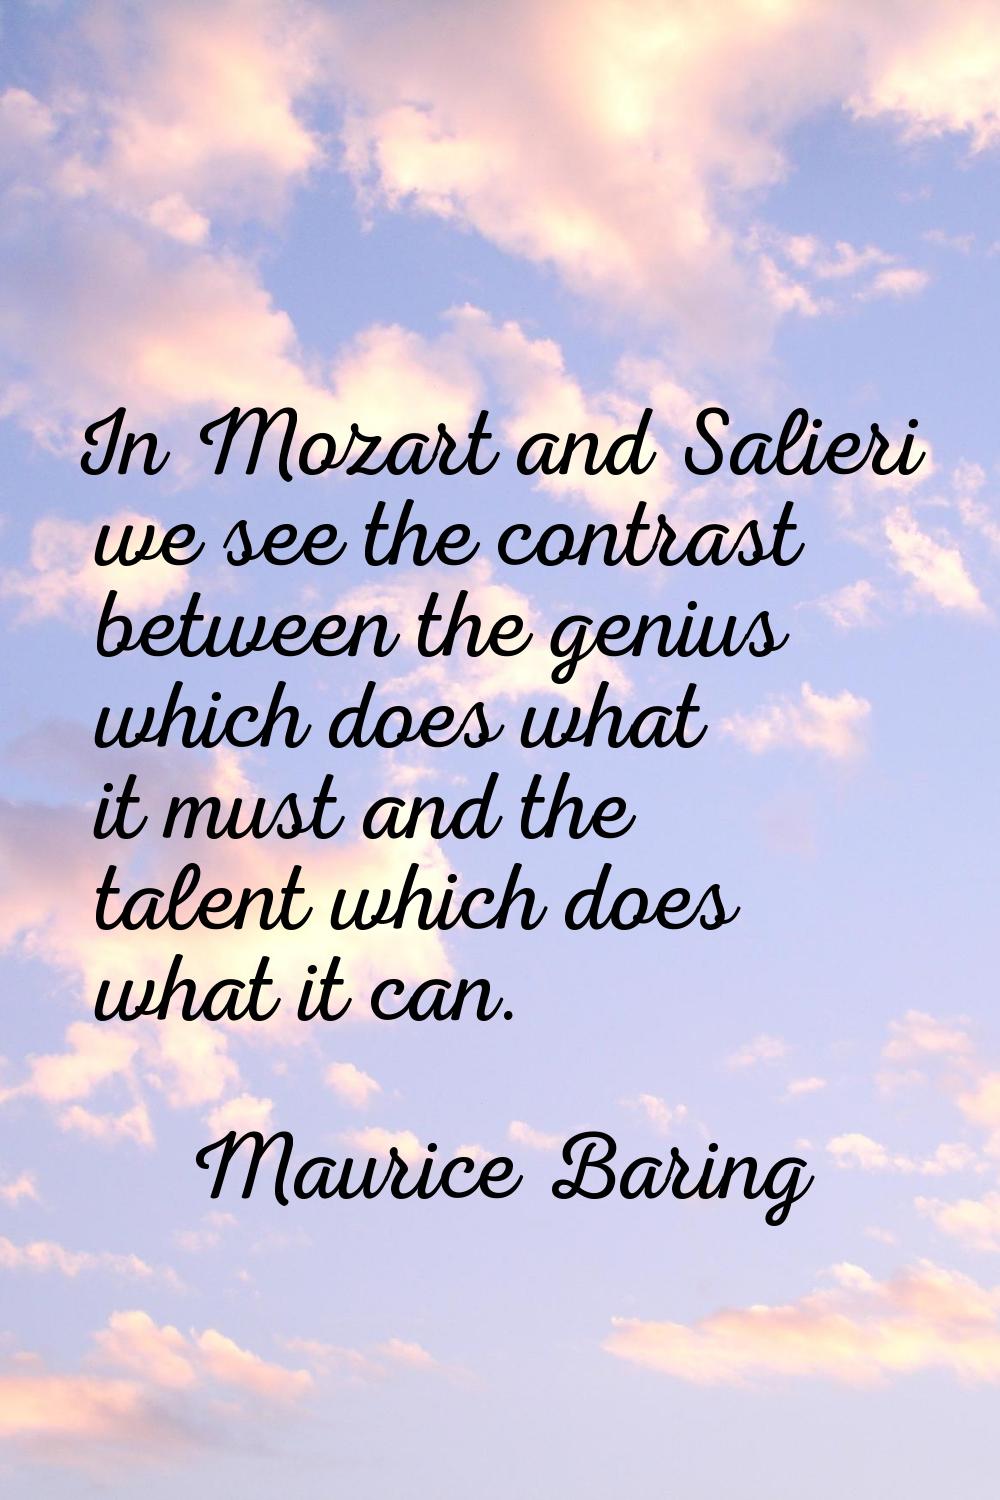 In Mozart and Salieri we see the contrast between the genius which does what it must and the talent